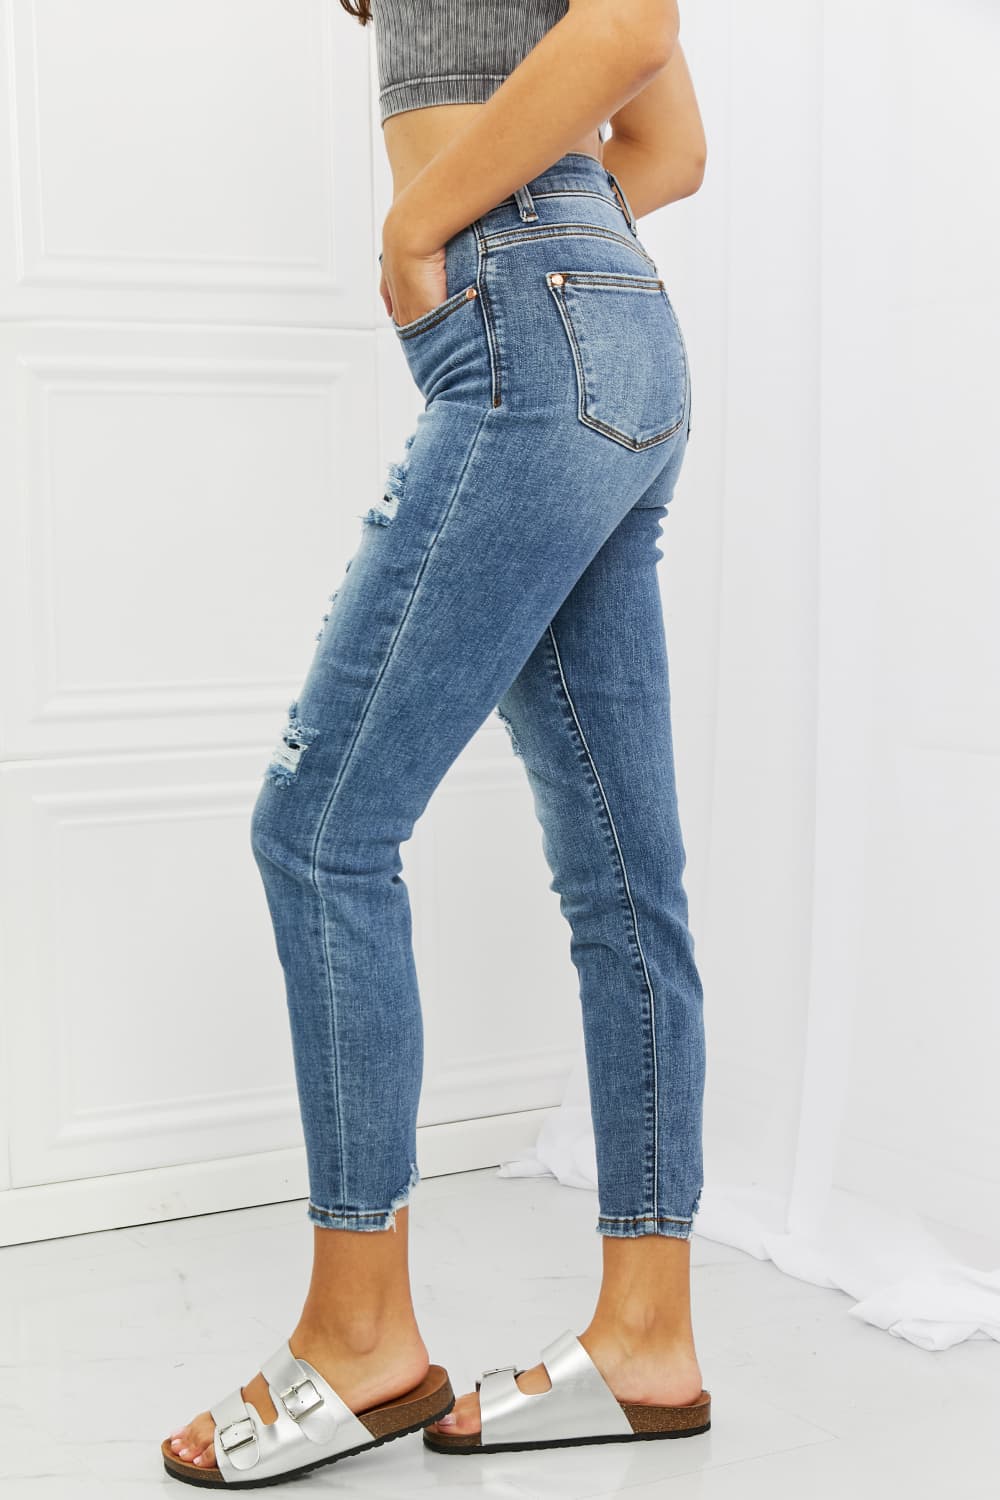 Judy Blue Dahlia Full Size Distressed Patch Jeans